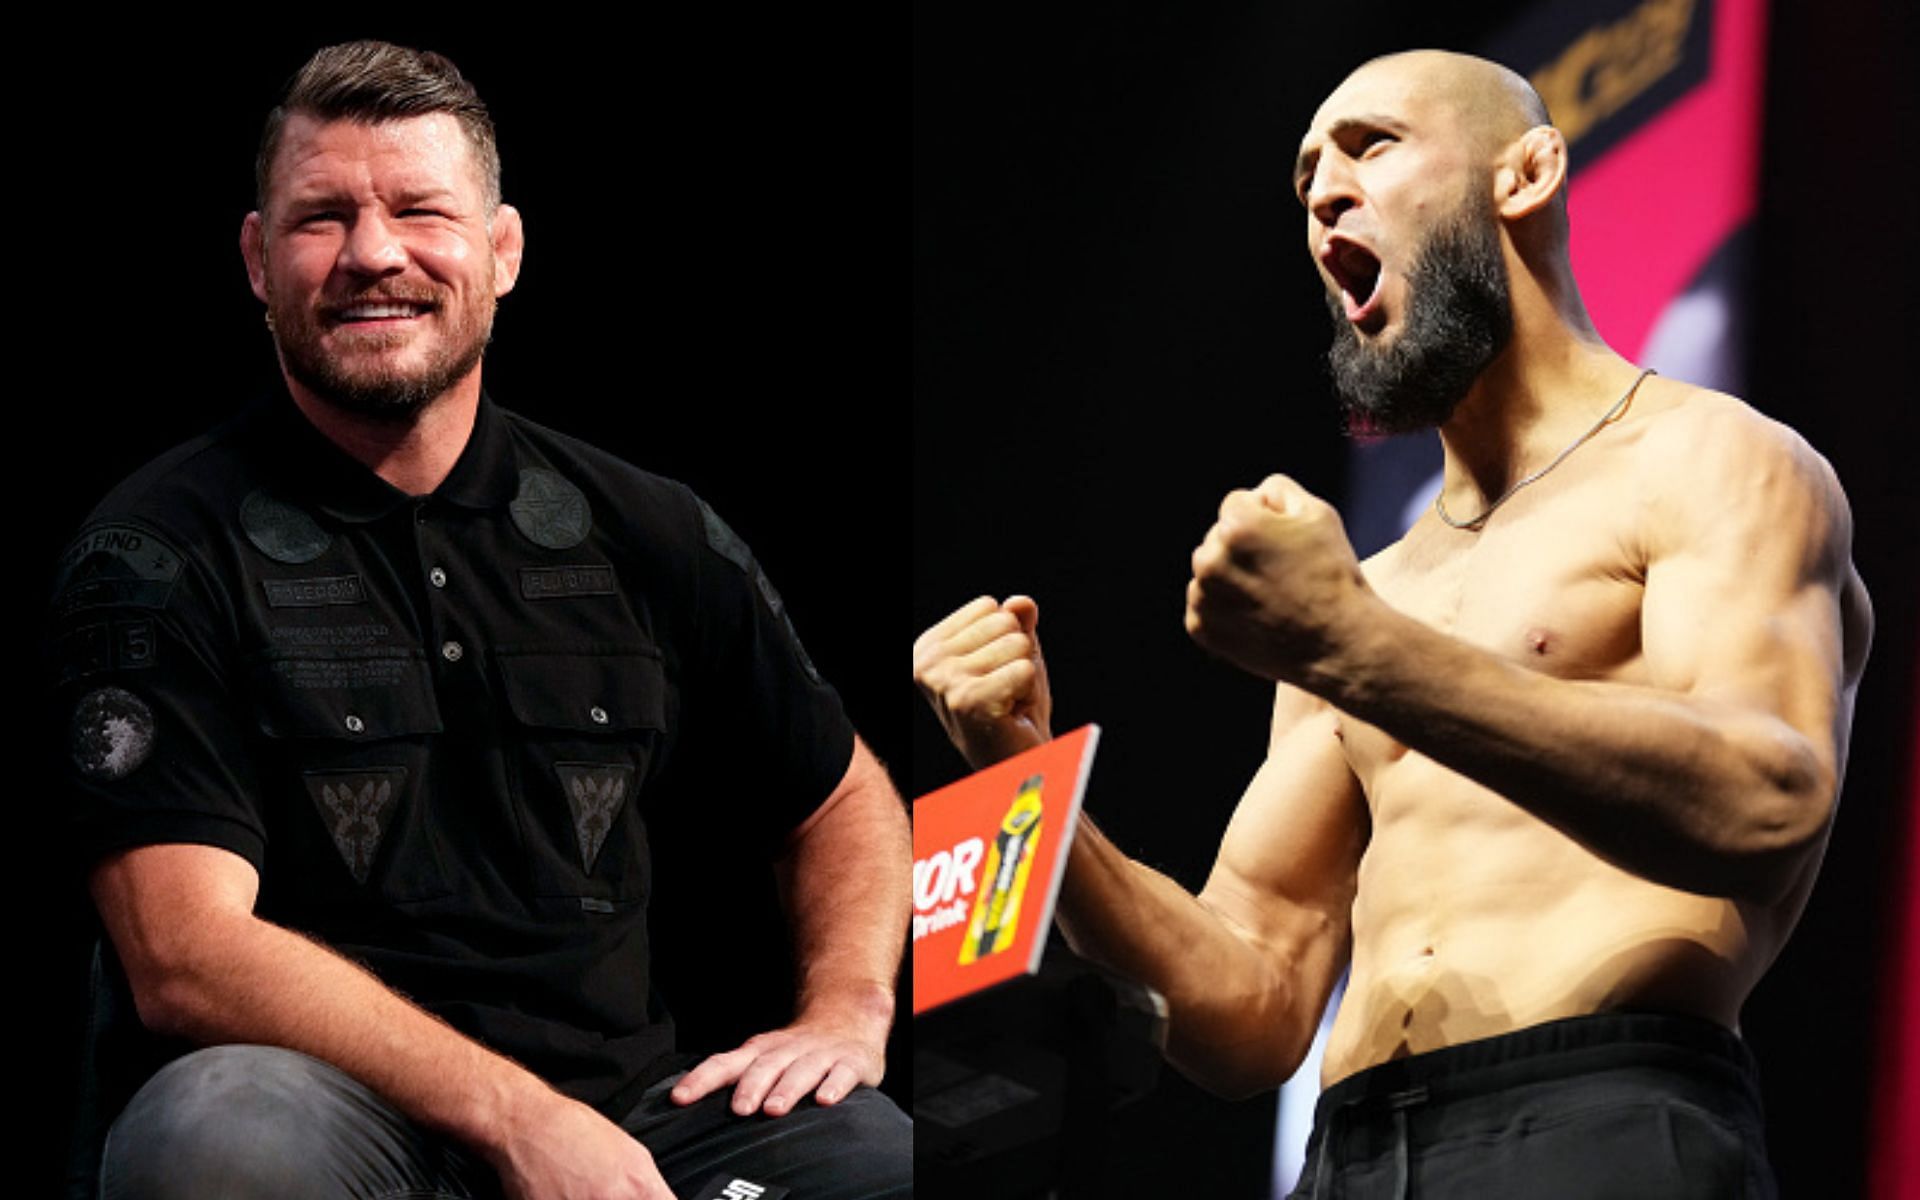 Michael Bisping (left), Khamzat Chimaev (right) [Images courtesy: Getty]